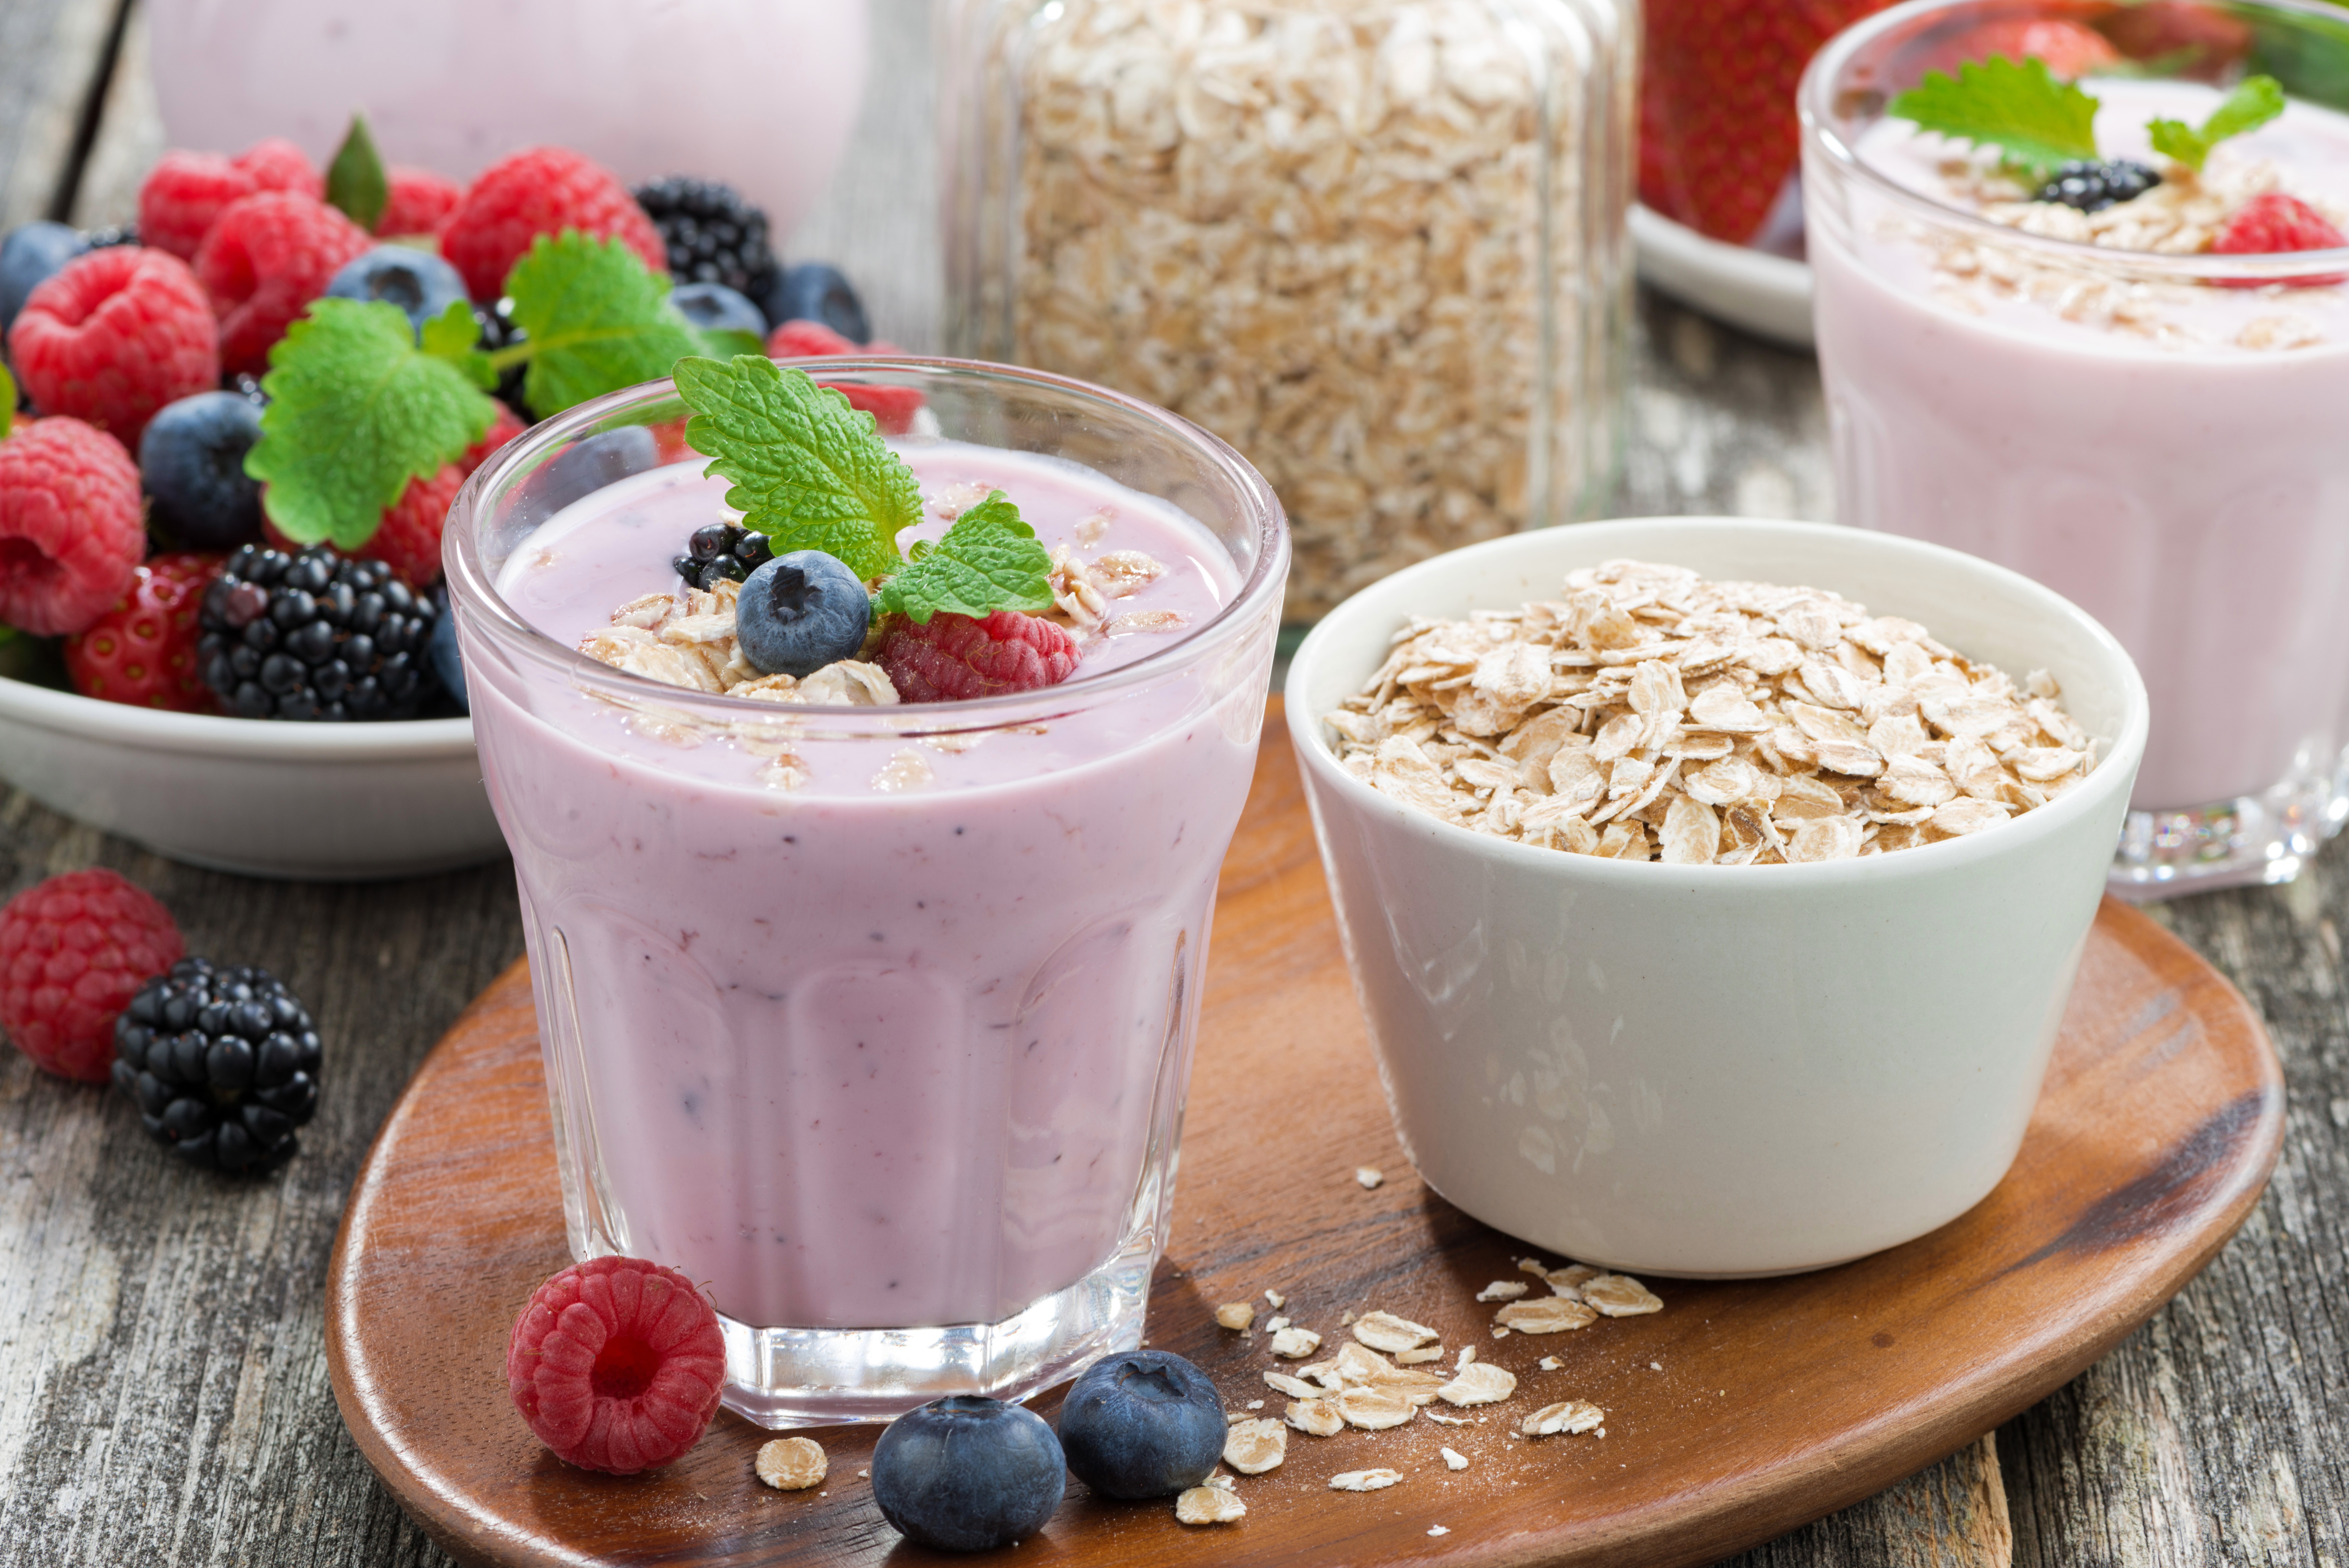 Foods that give you energy smoothies, oats, whole grains, and berries